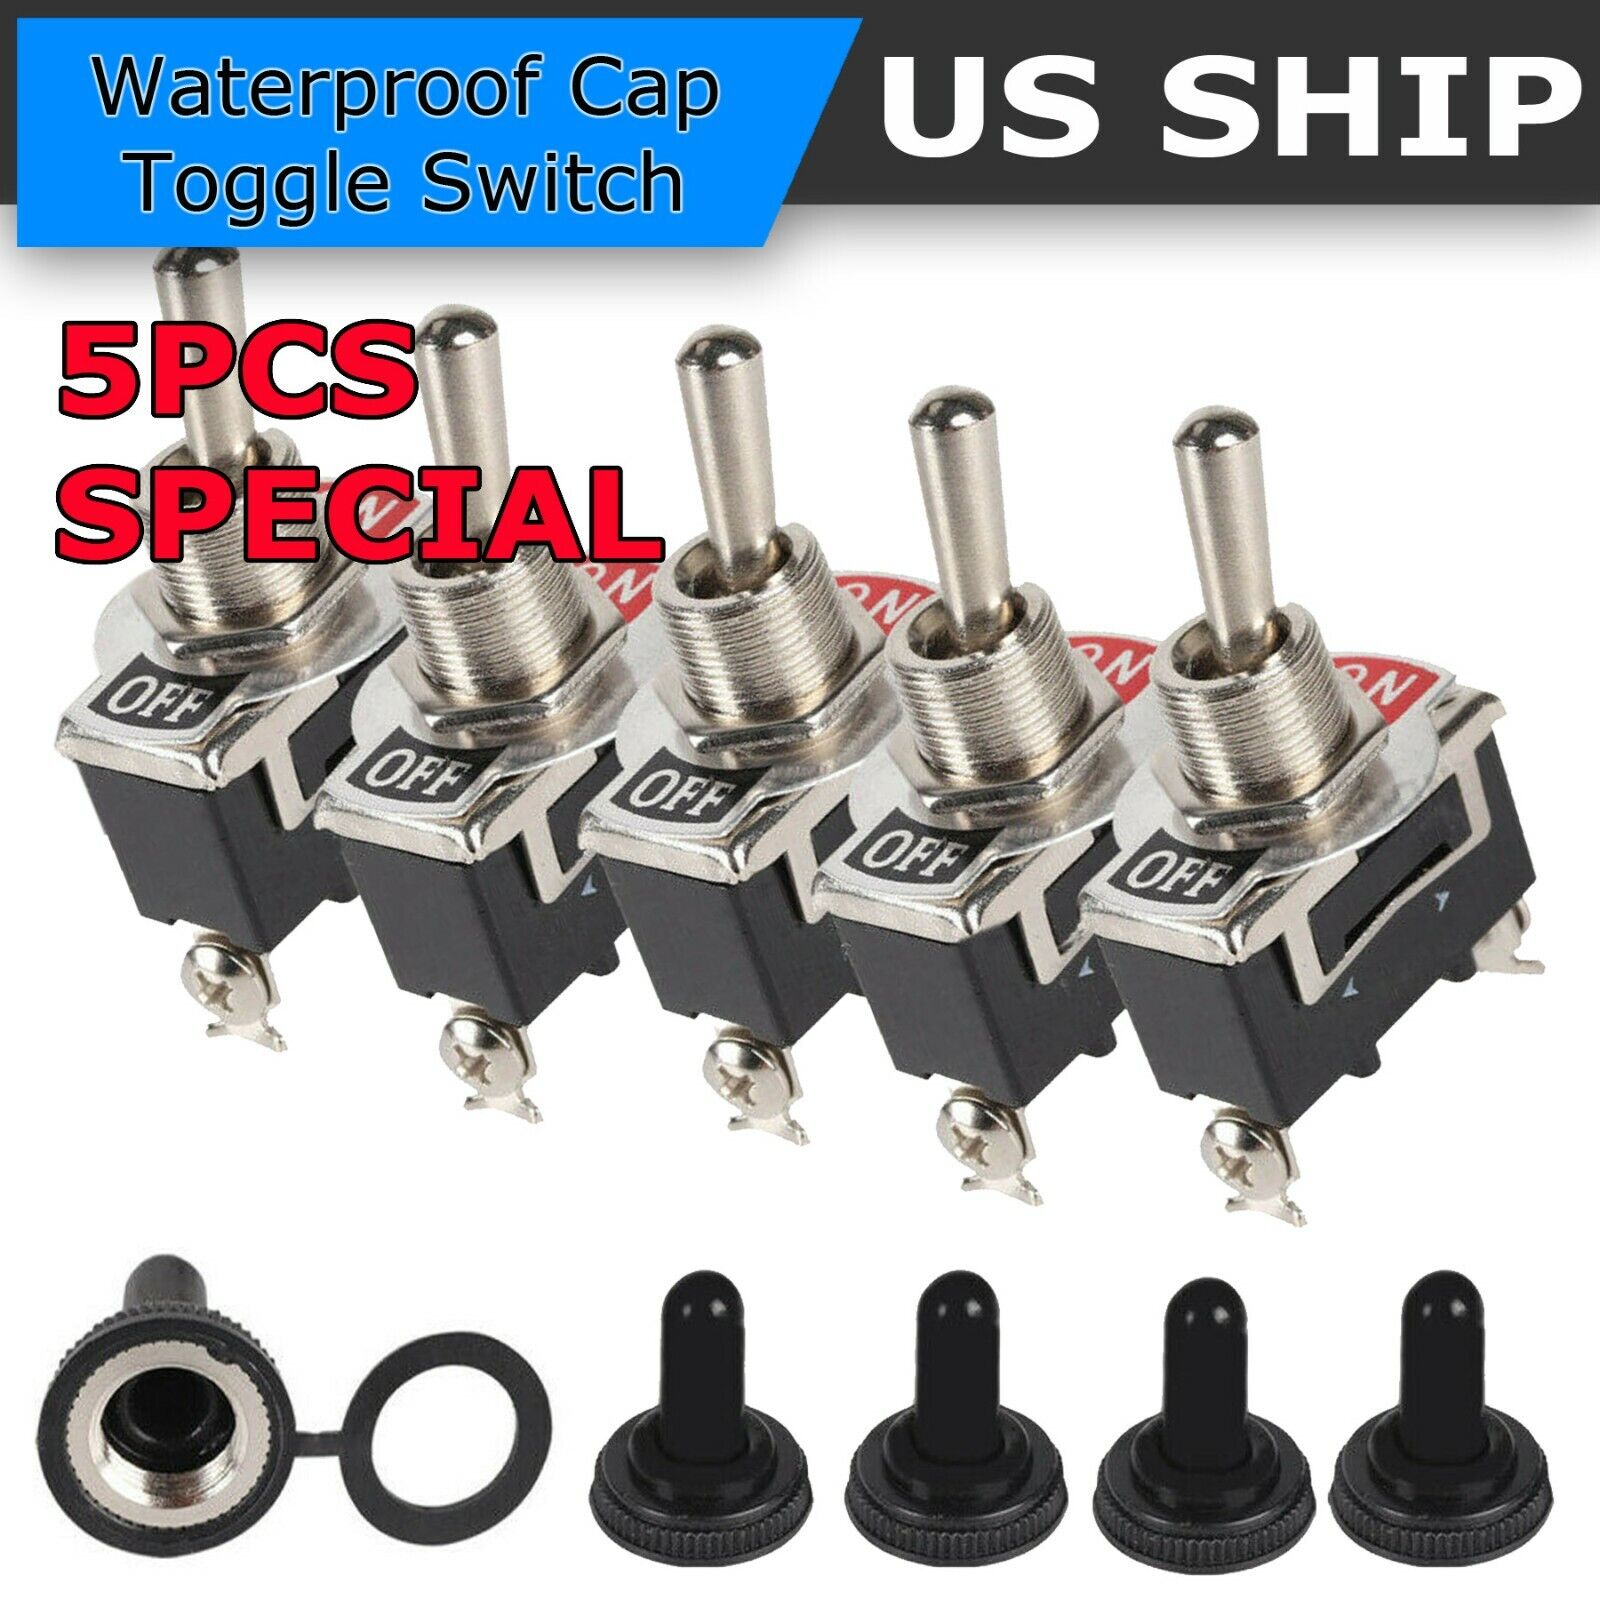 5X Toggle SWITCH ON/OFF Heavy Duty 15A 250V SPST 2 Terminal Car Boat* Waterproof